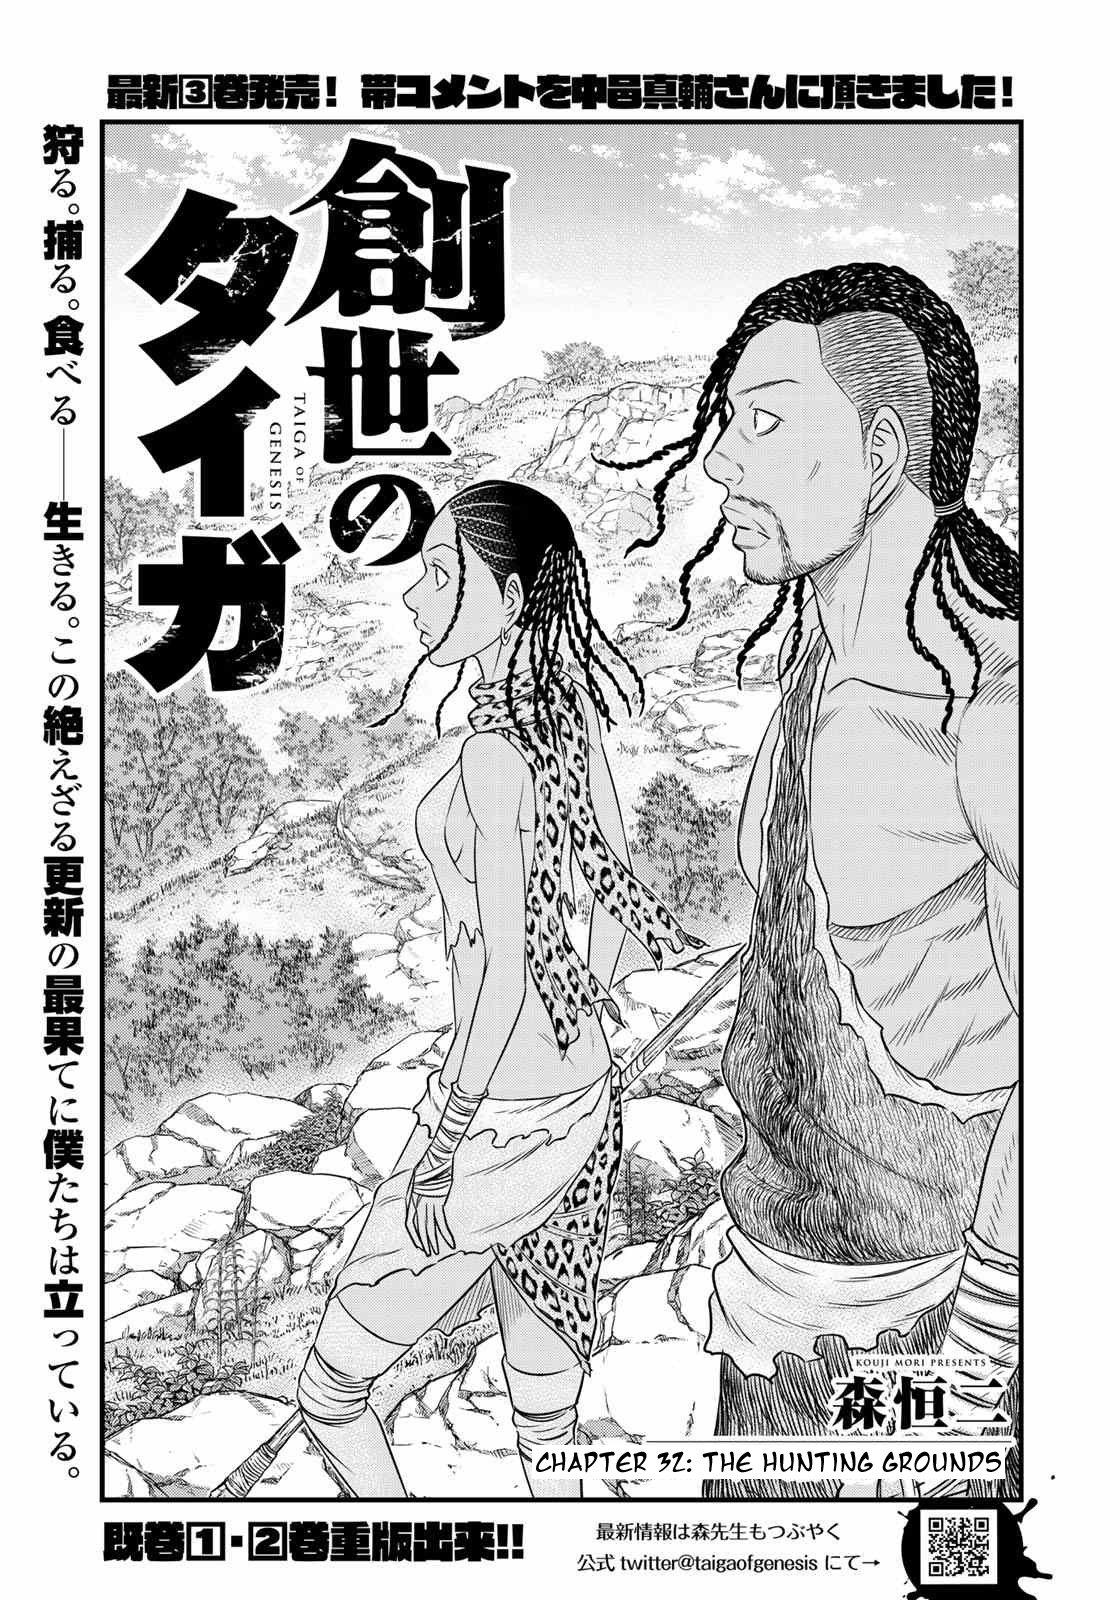 Sousei no Taiga Vol. 4 Ch. 32 The Hunting Grounds